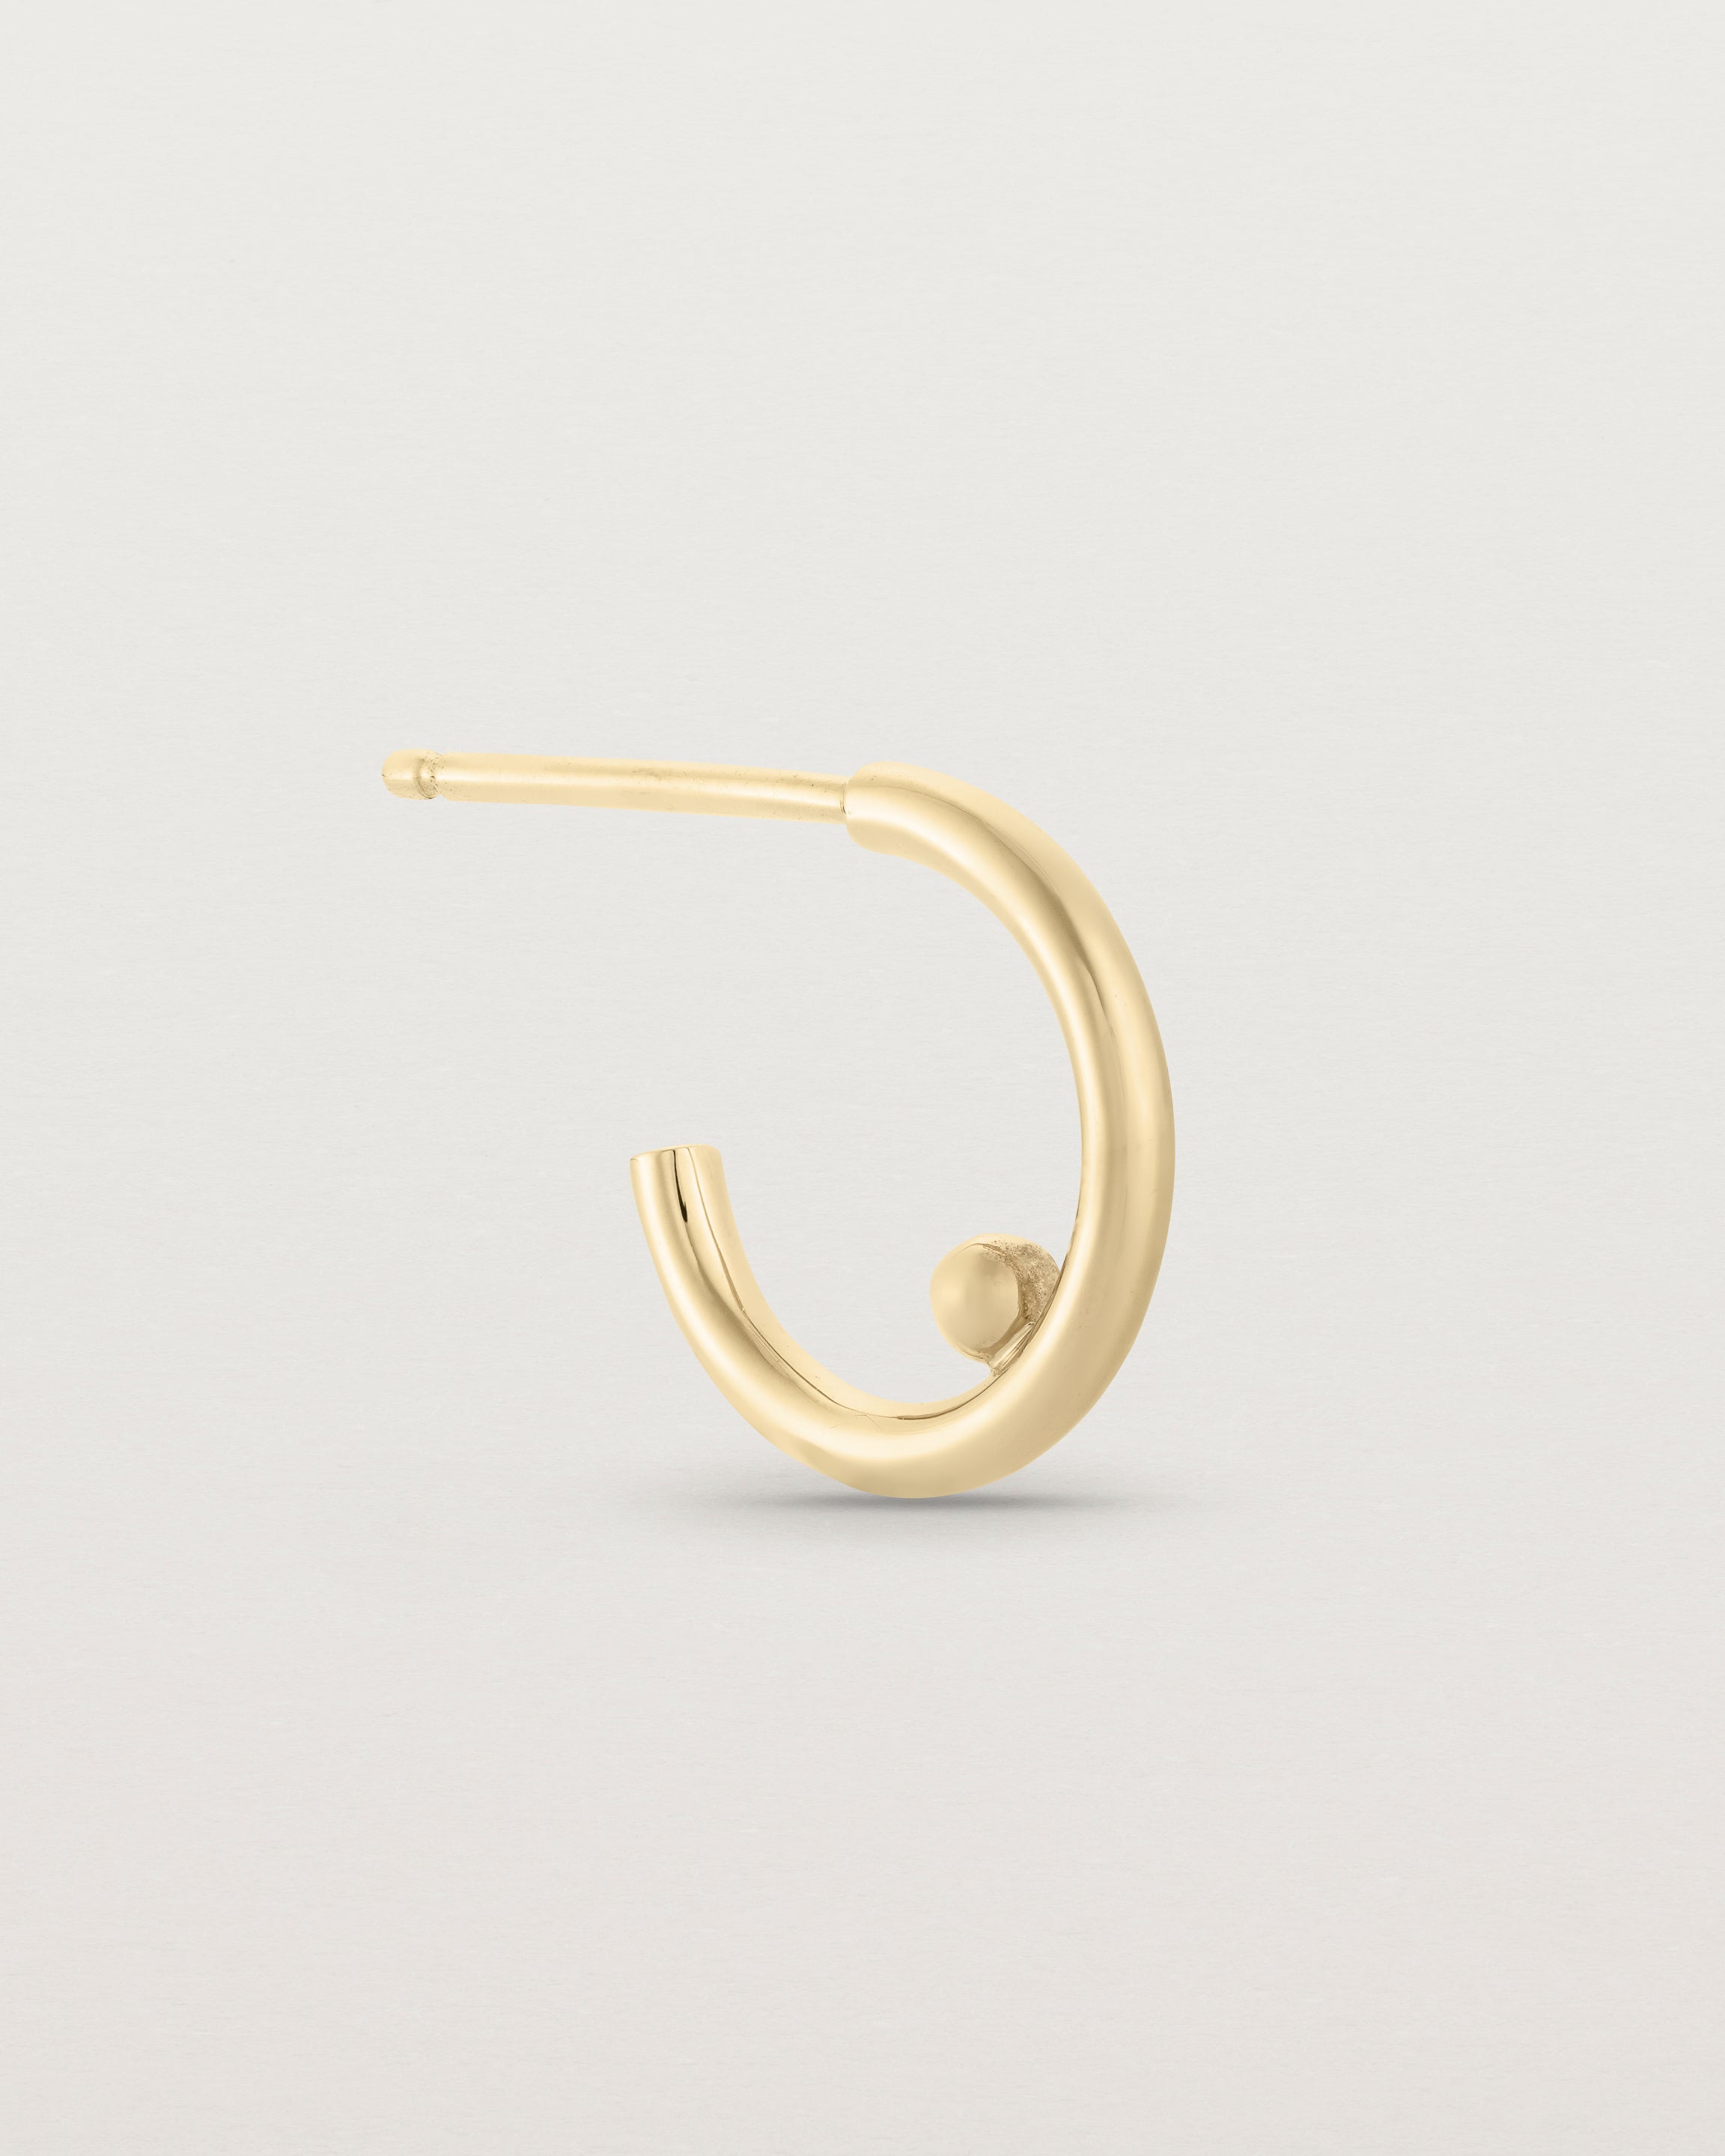 A small pair of yellow gold open hoops with a gold ball in the centre